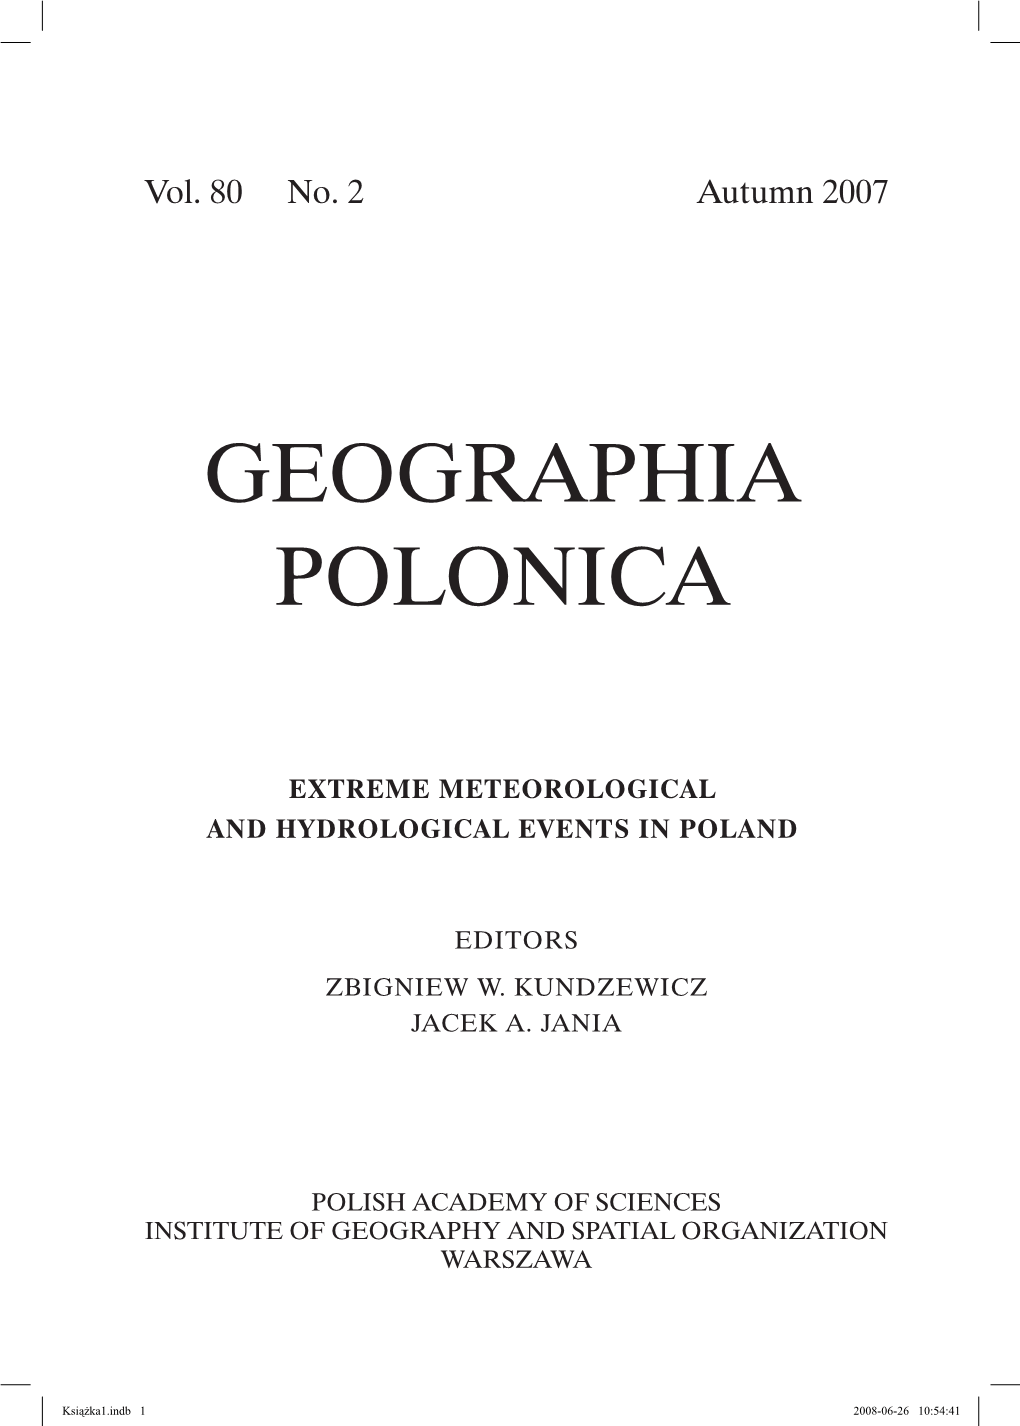 Geographia Polonica Vol. 80 No. 2 (2007) : Extreme Meteorological